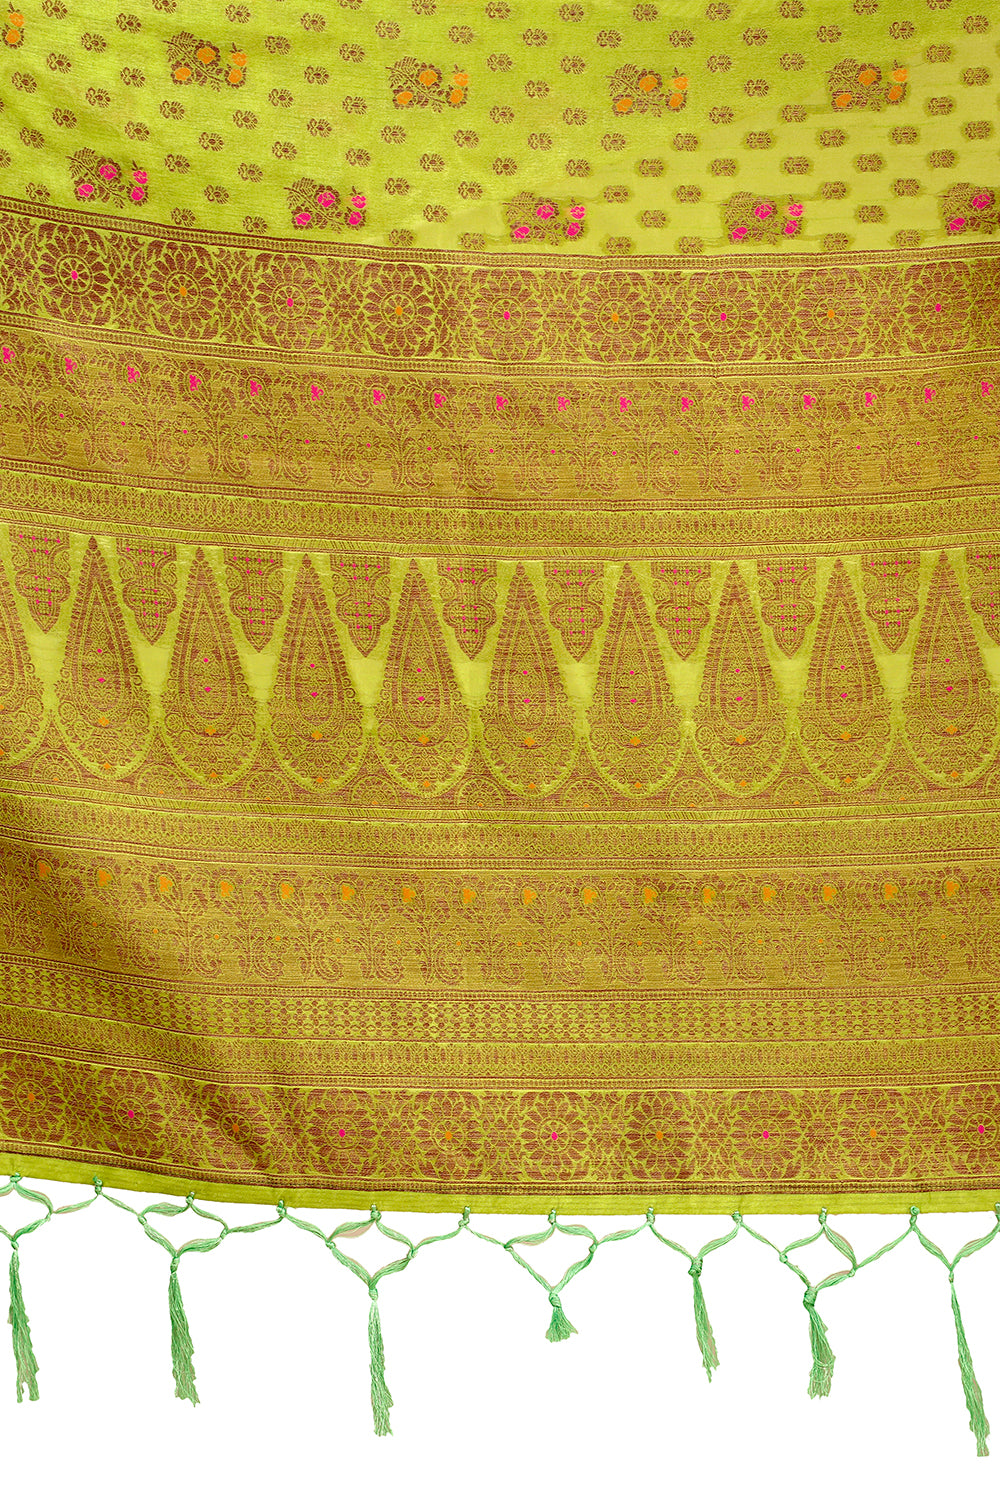 New Super Trending Chartreuse Green Color Designer Saree Collection